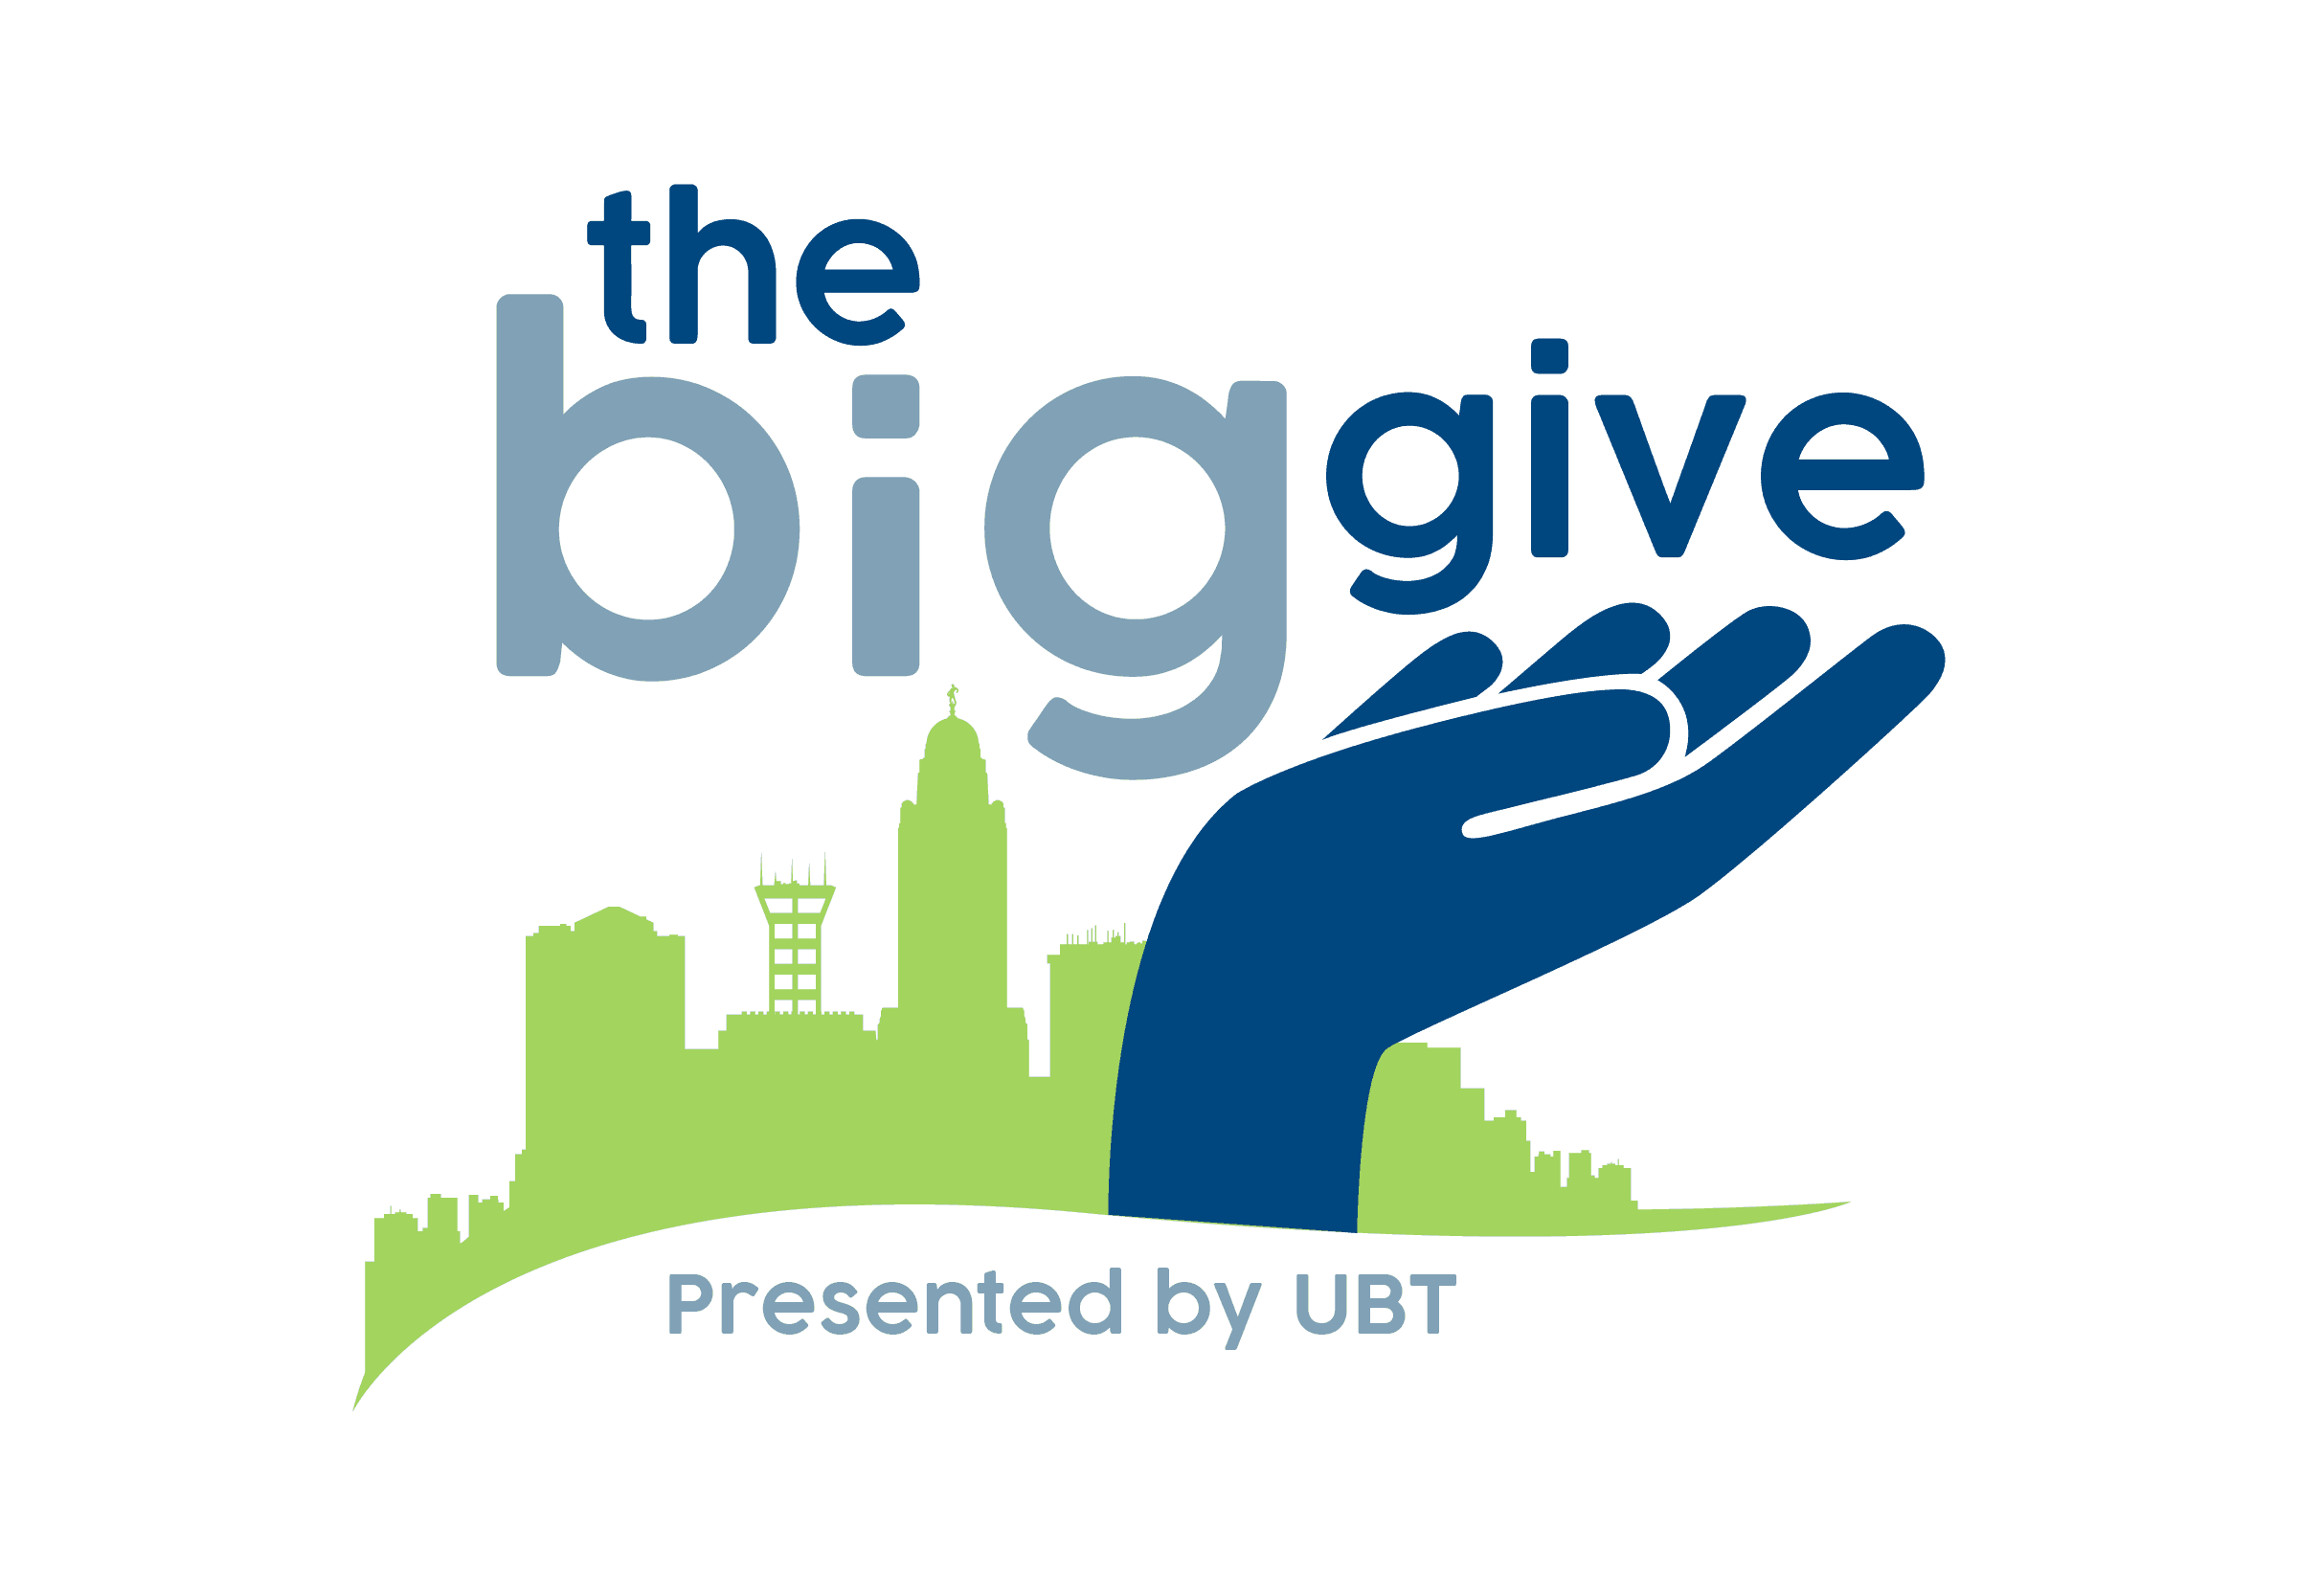 Lincoln organizations including CSS are finalists in UBT 'Big Give' challenge